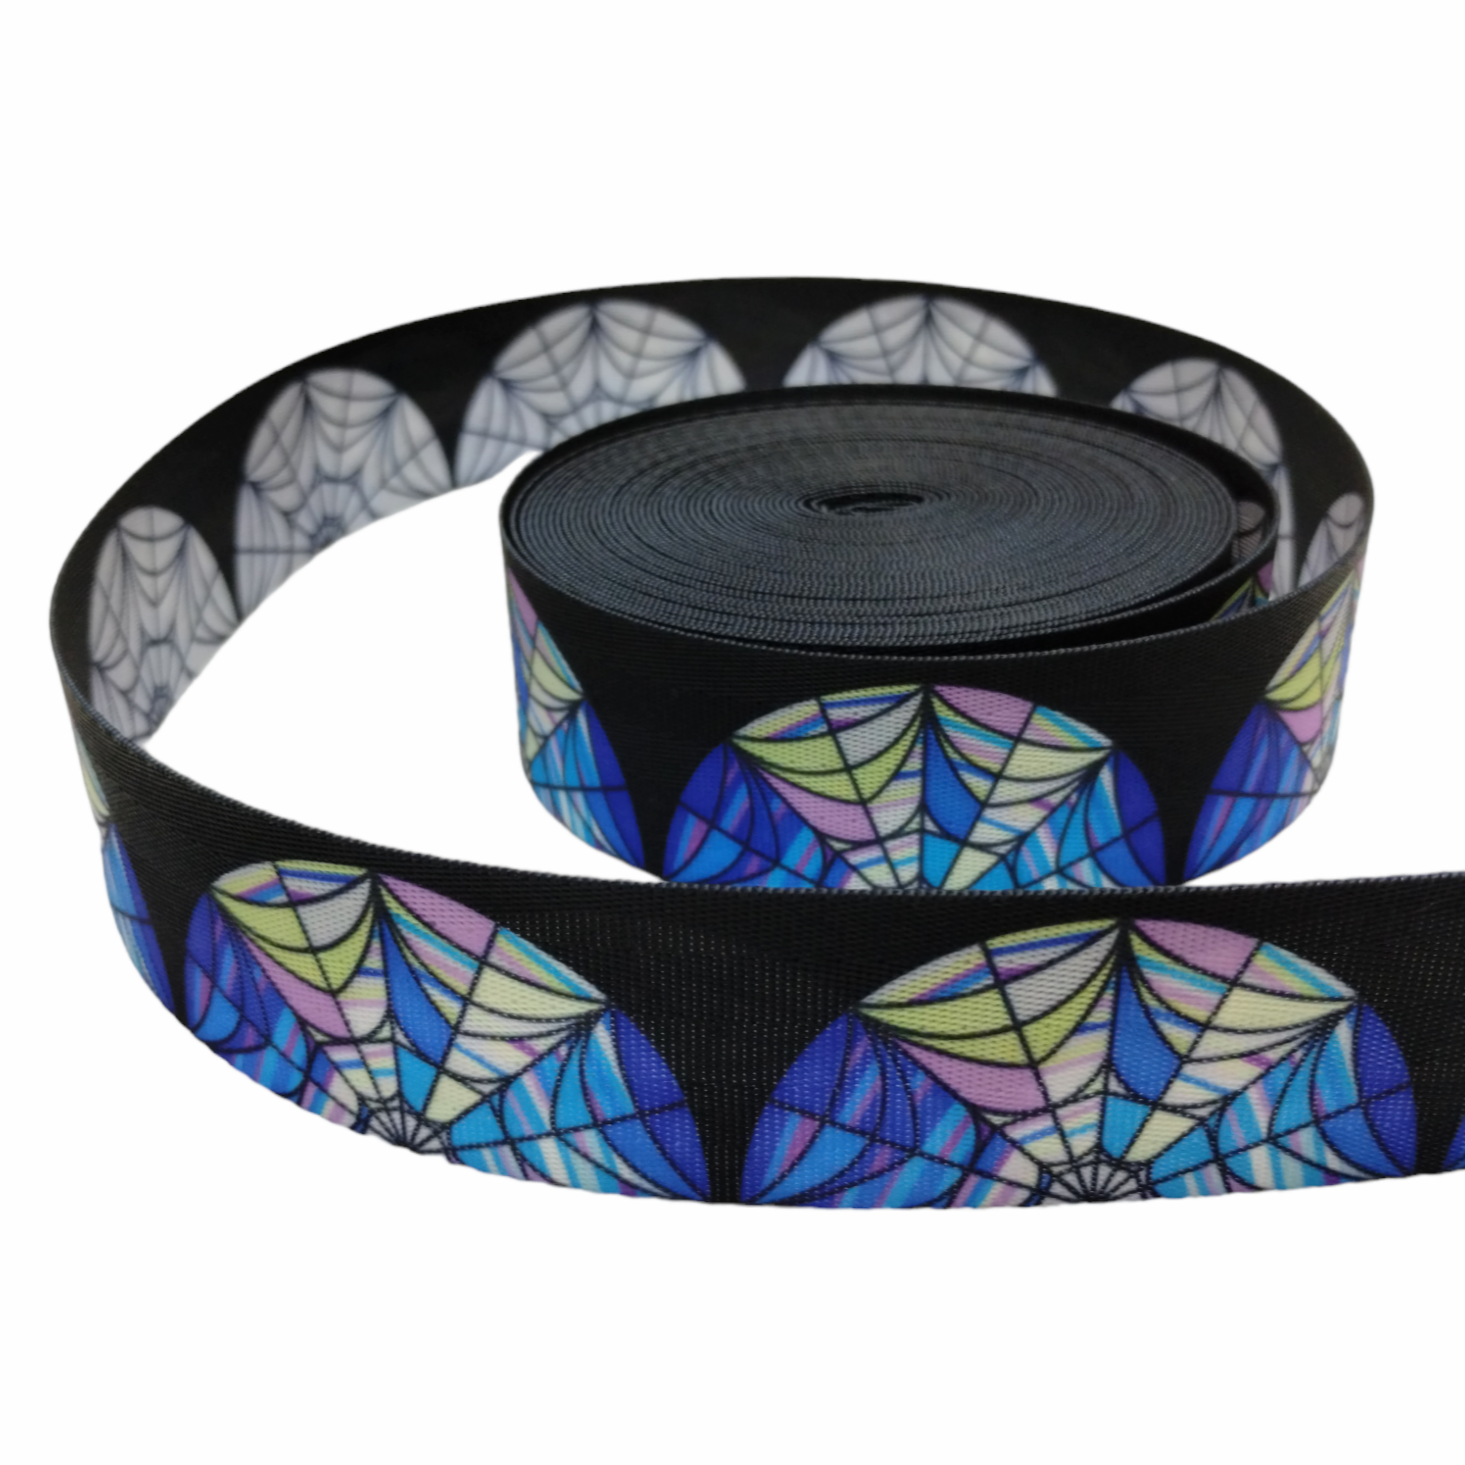 Allergic to Color Webbing - 2 sizes, sold by the meter 38mm 1.5" Atelier Fiber Arts